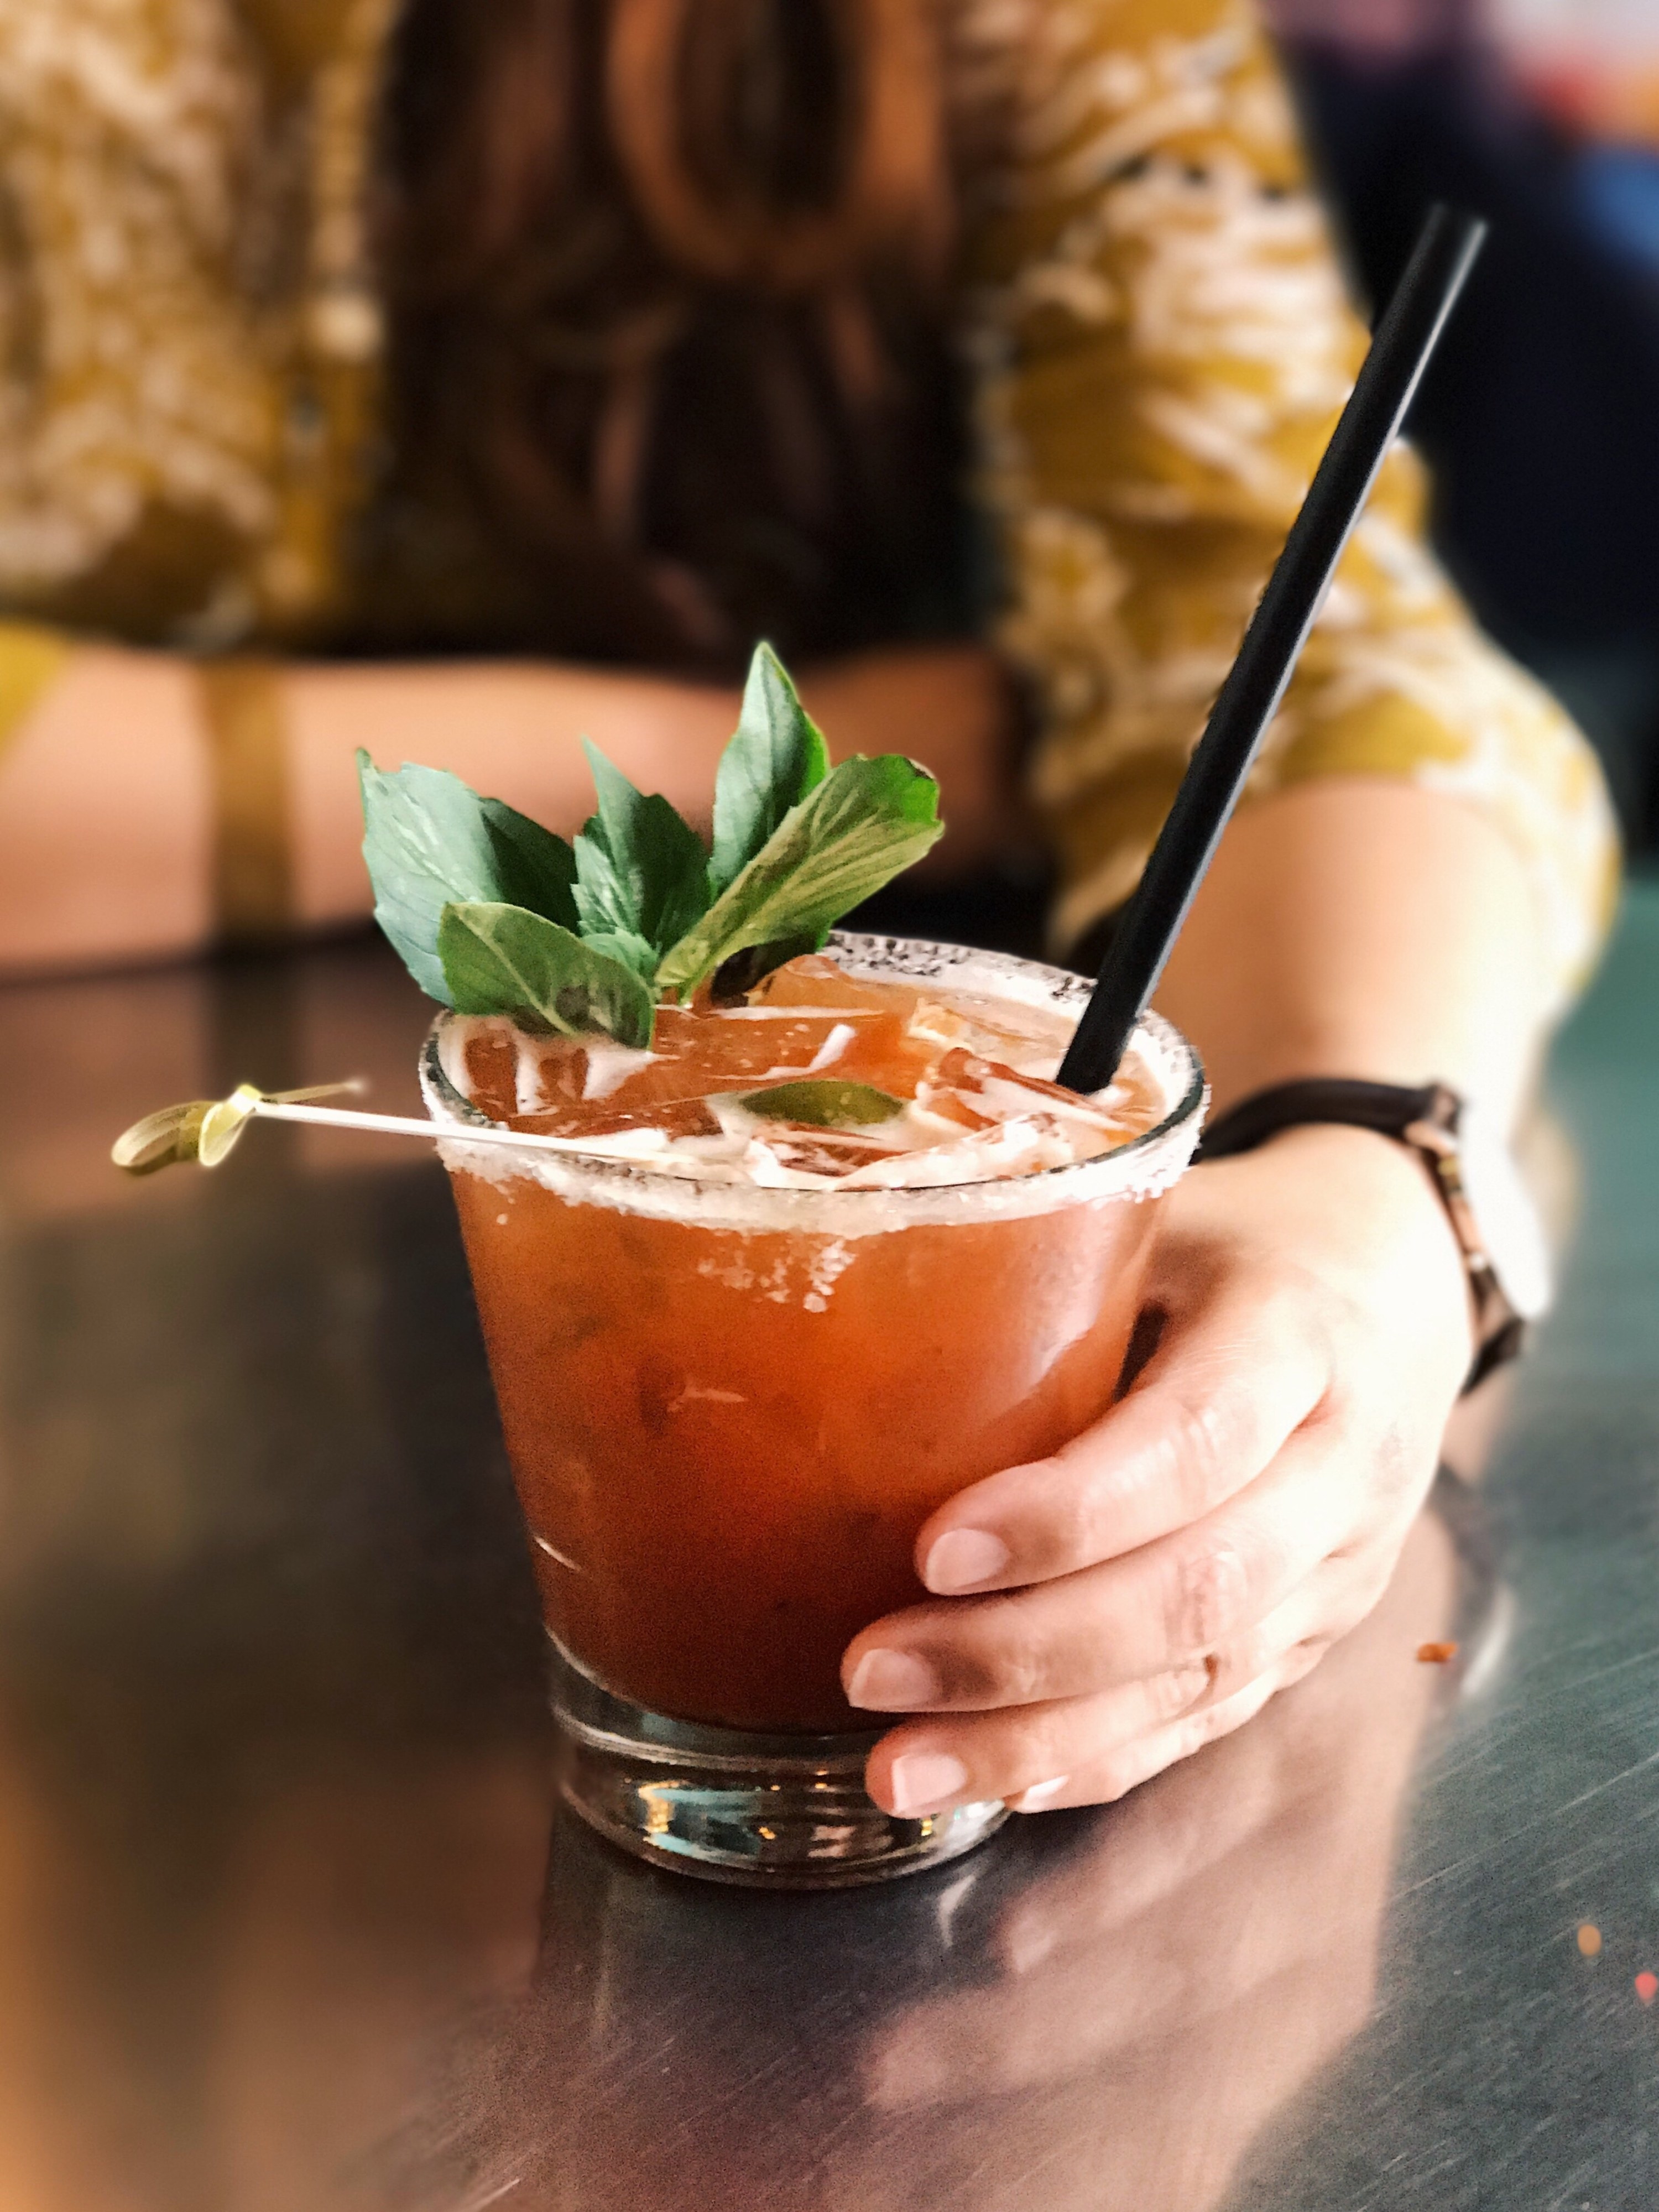 Person holding a Bloody Mary topped with herbs and a dark straw